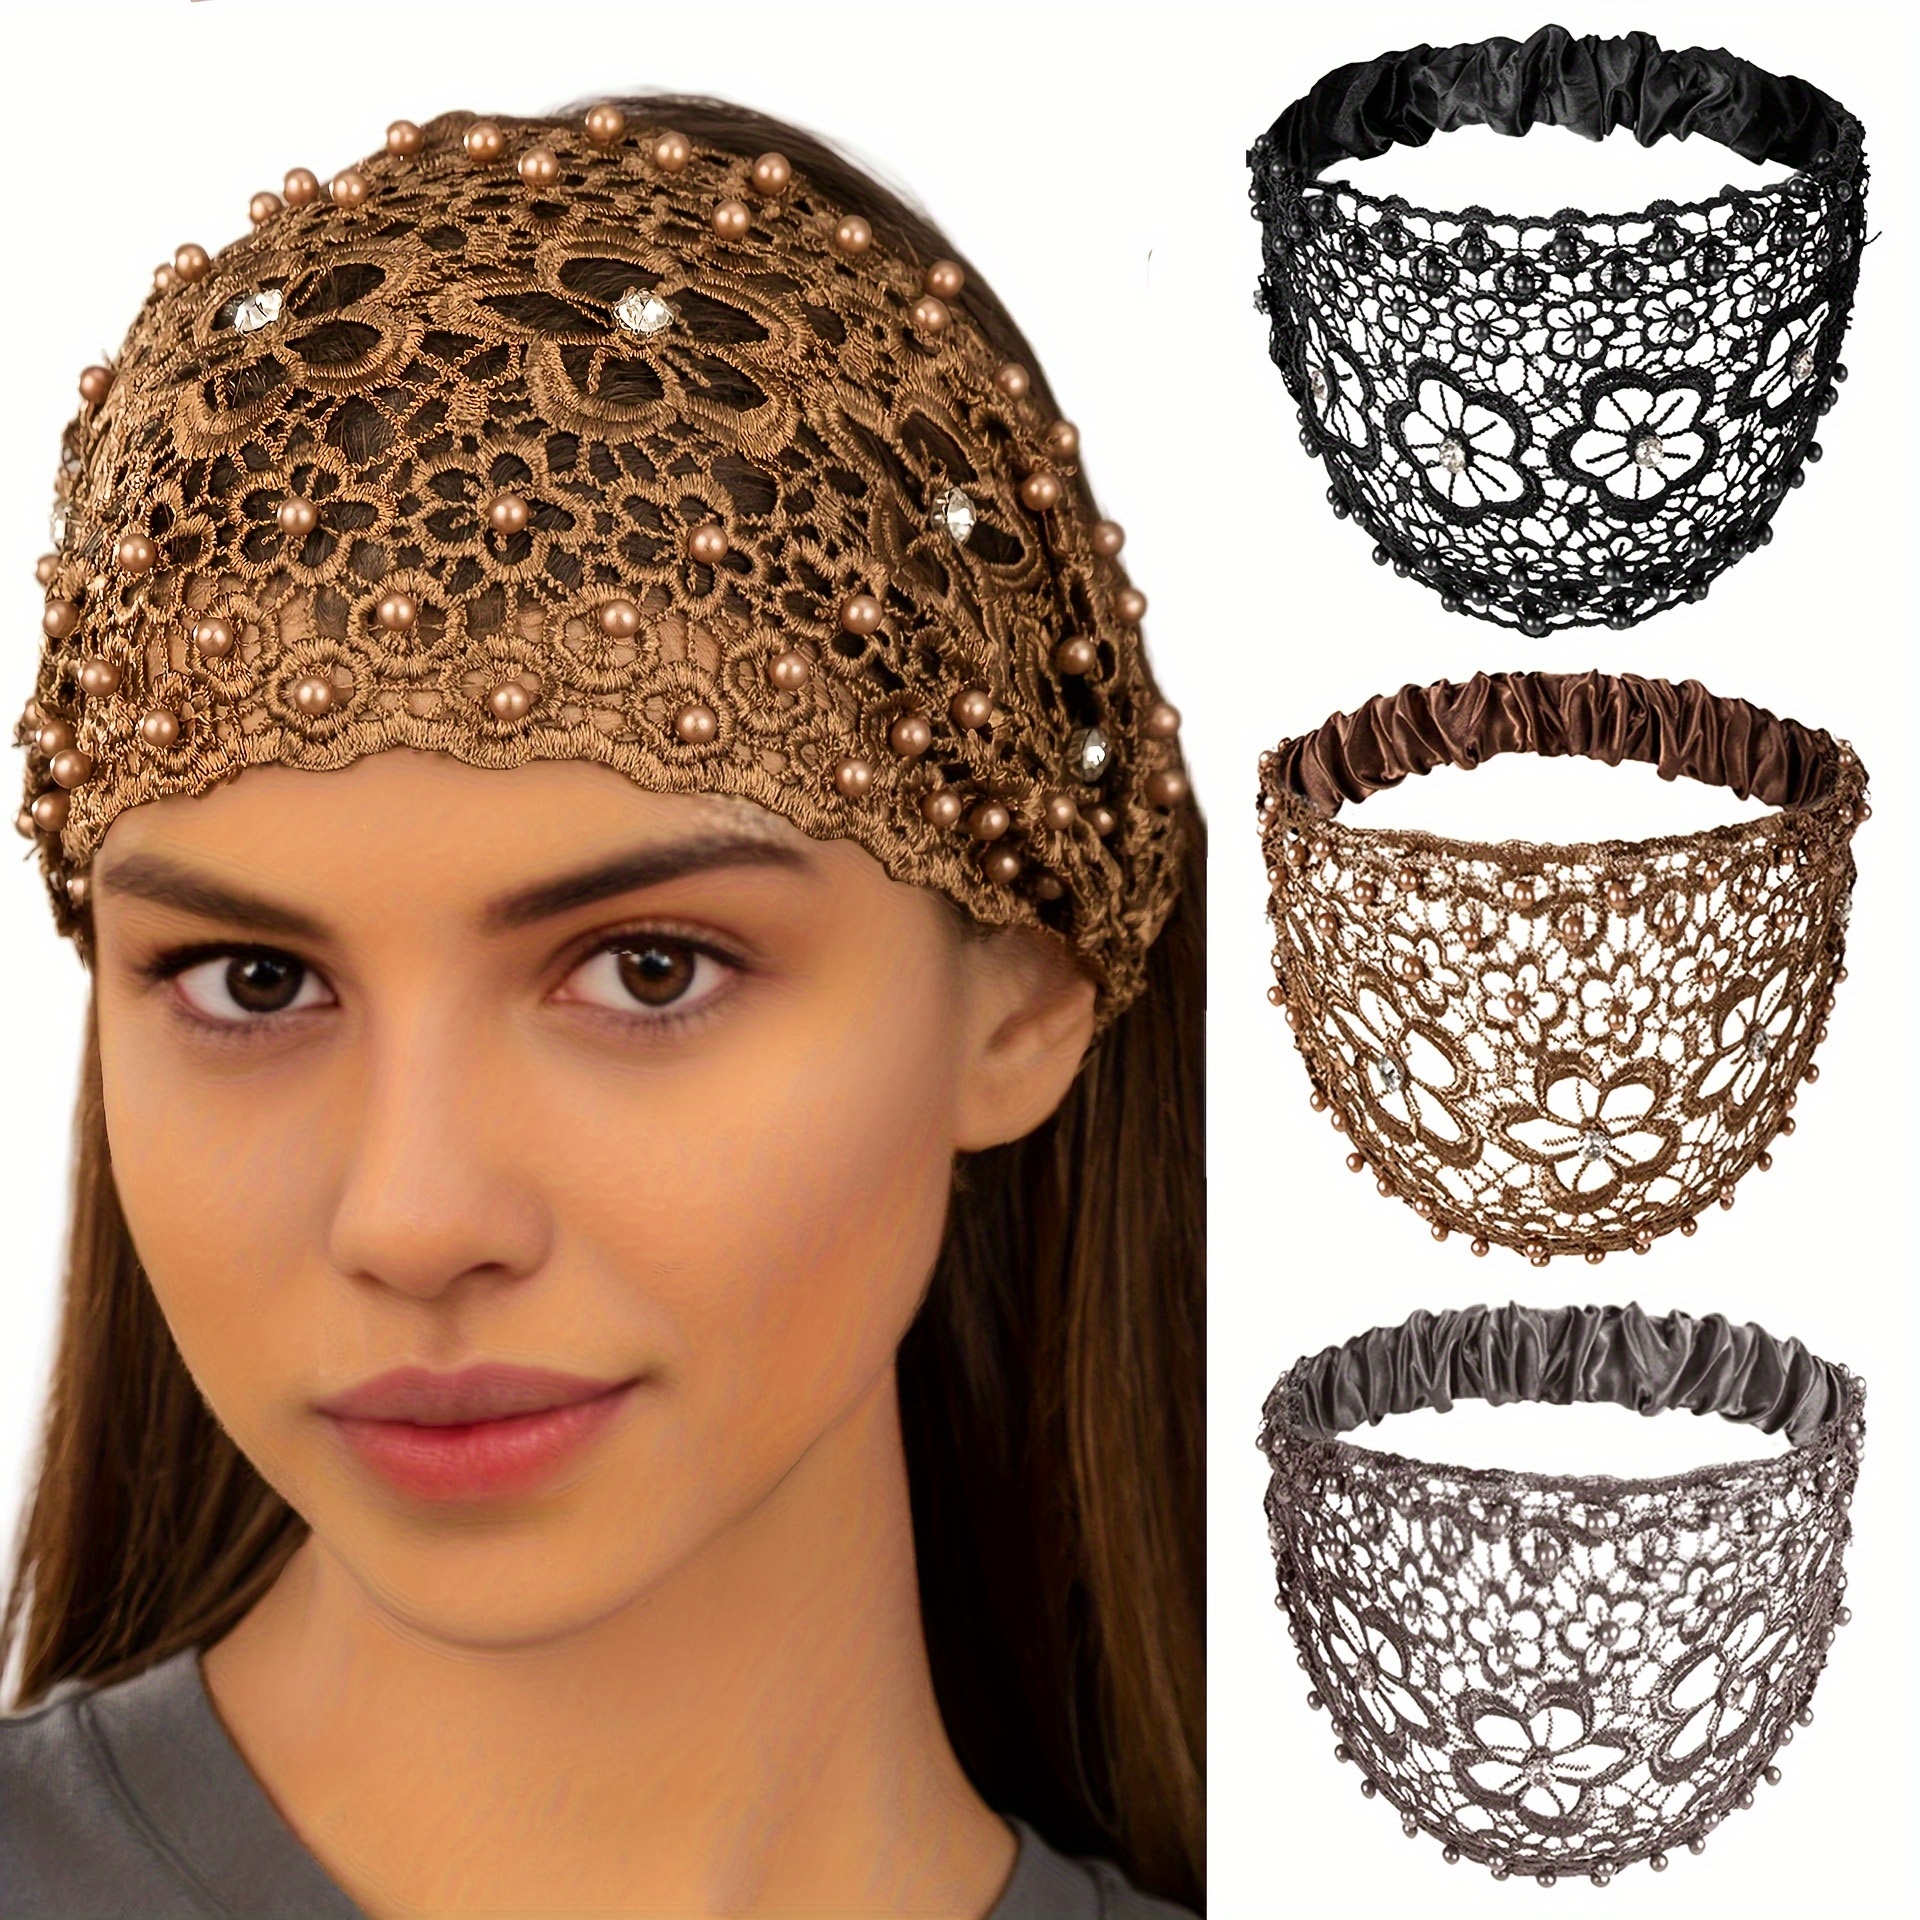 

4-pack Boho Lace Headbands With Faux Pearls, Wide Hollow Hair Wraps, Vintage Stretch Hair Accessories For Women